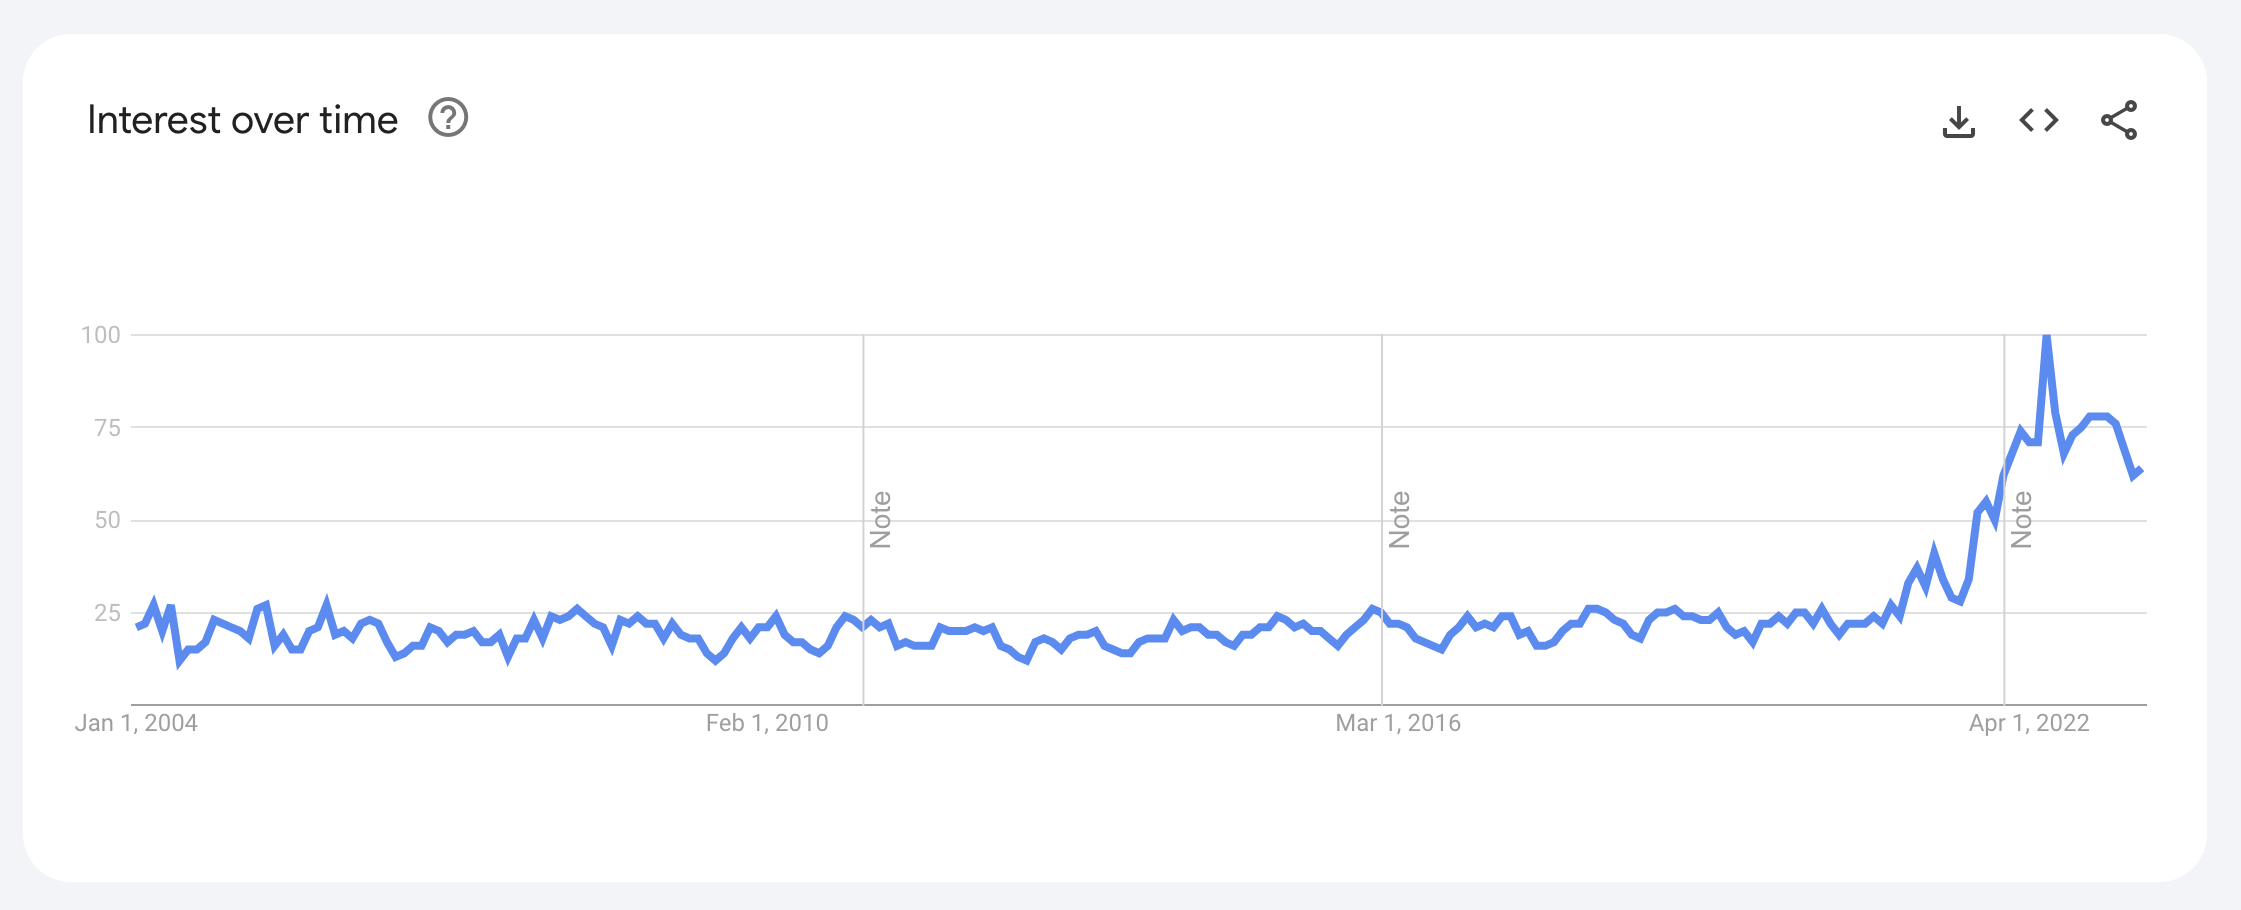 Inflation Search Interest Over Time on Google Trends